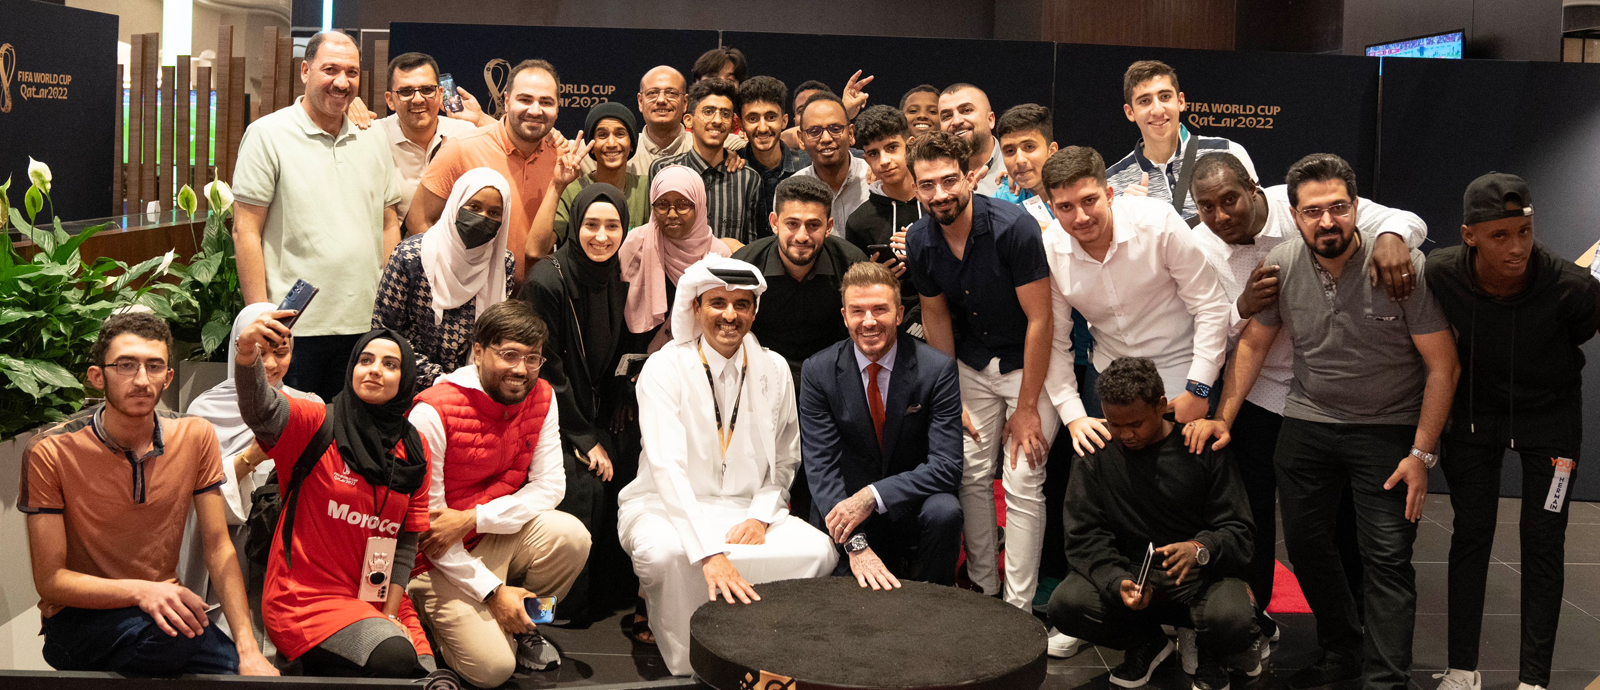 HH the Amir Meets Group of Fans